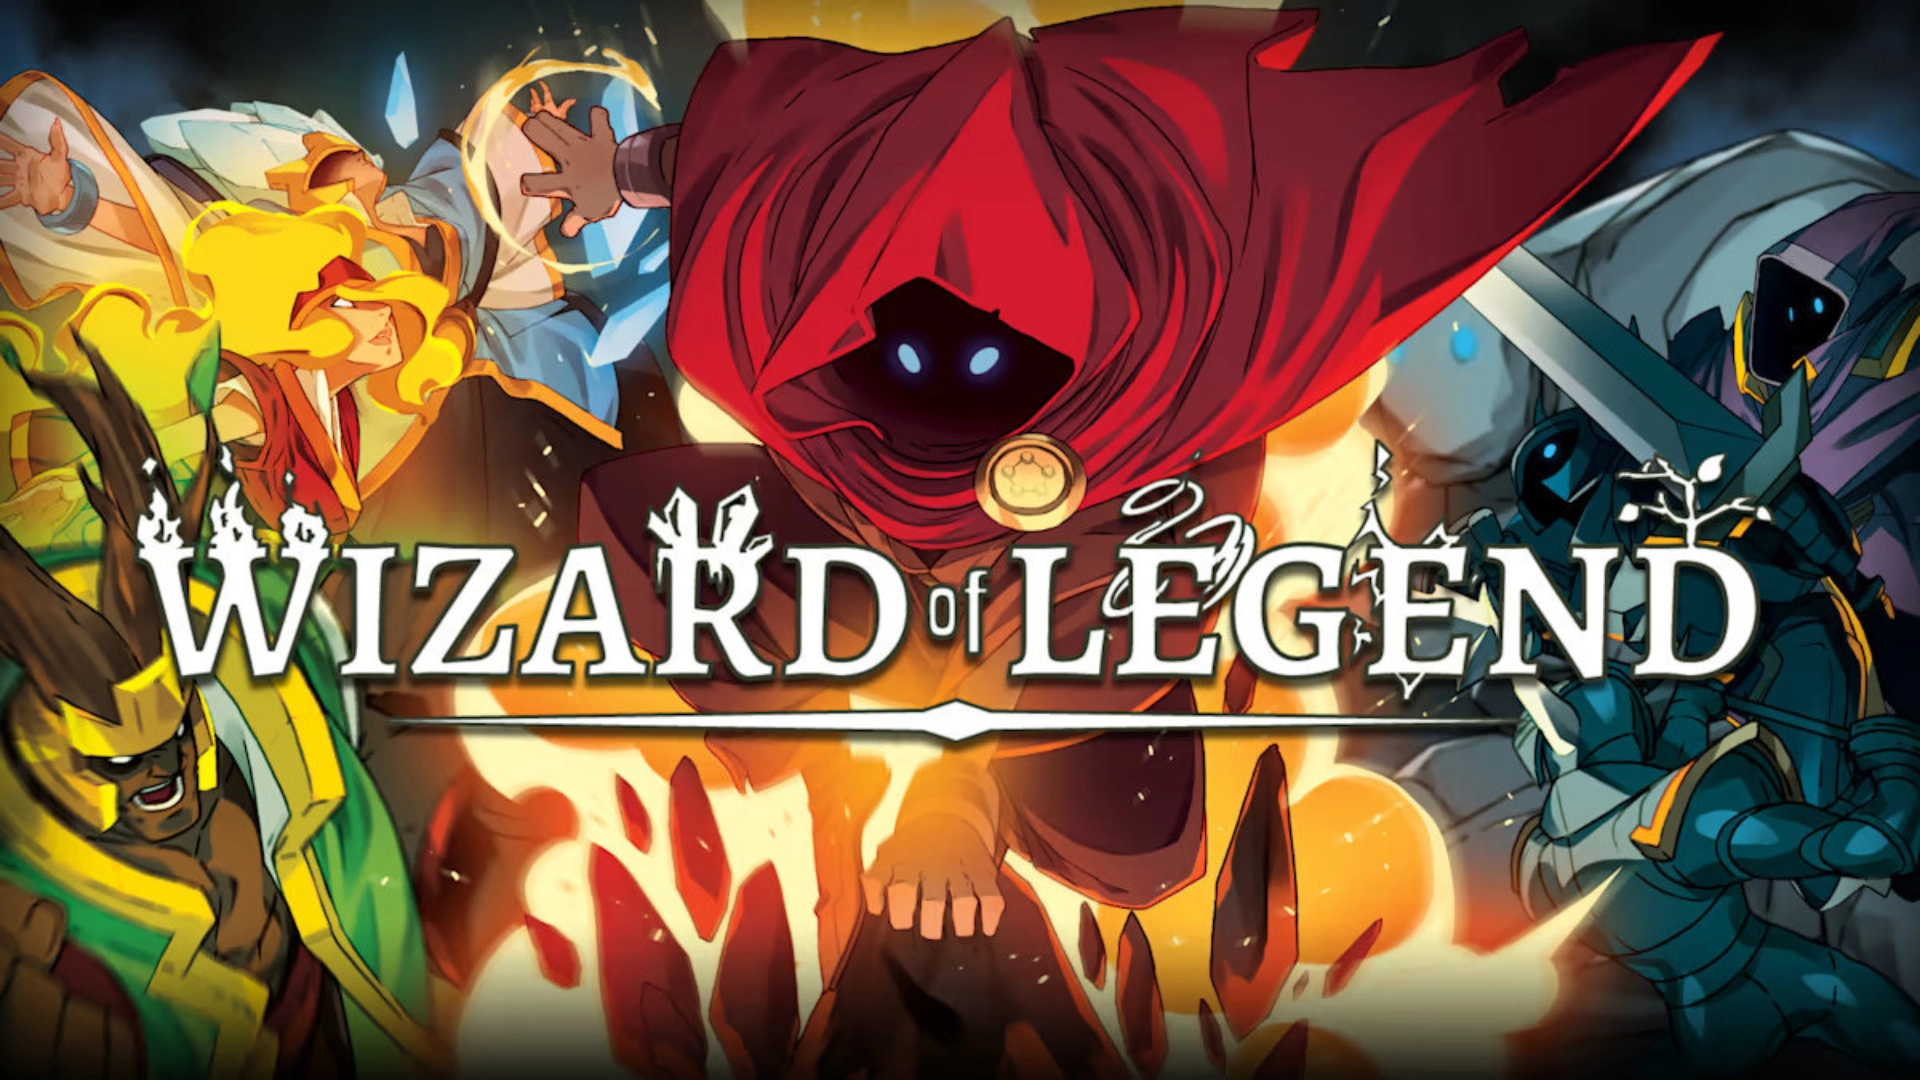 Best Wizard Games: Wizard of Legend.  The image shows the game's logo in front of flames and a strange hooded figure.